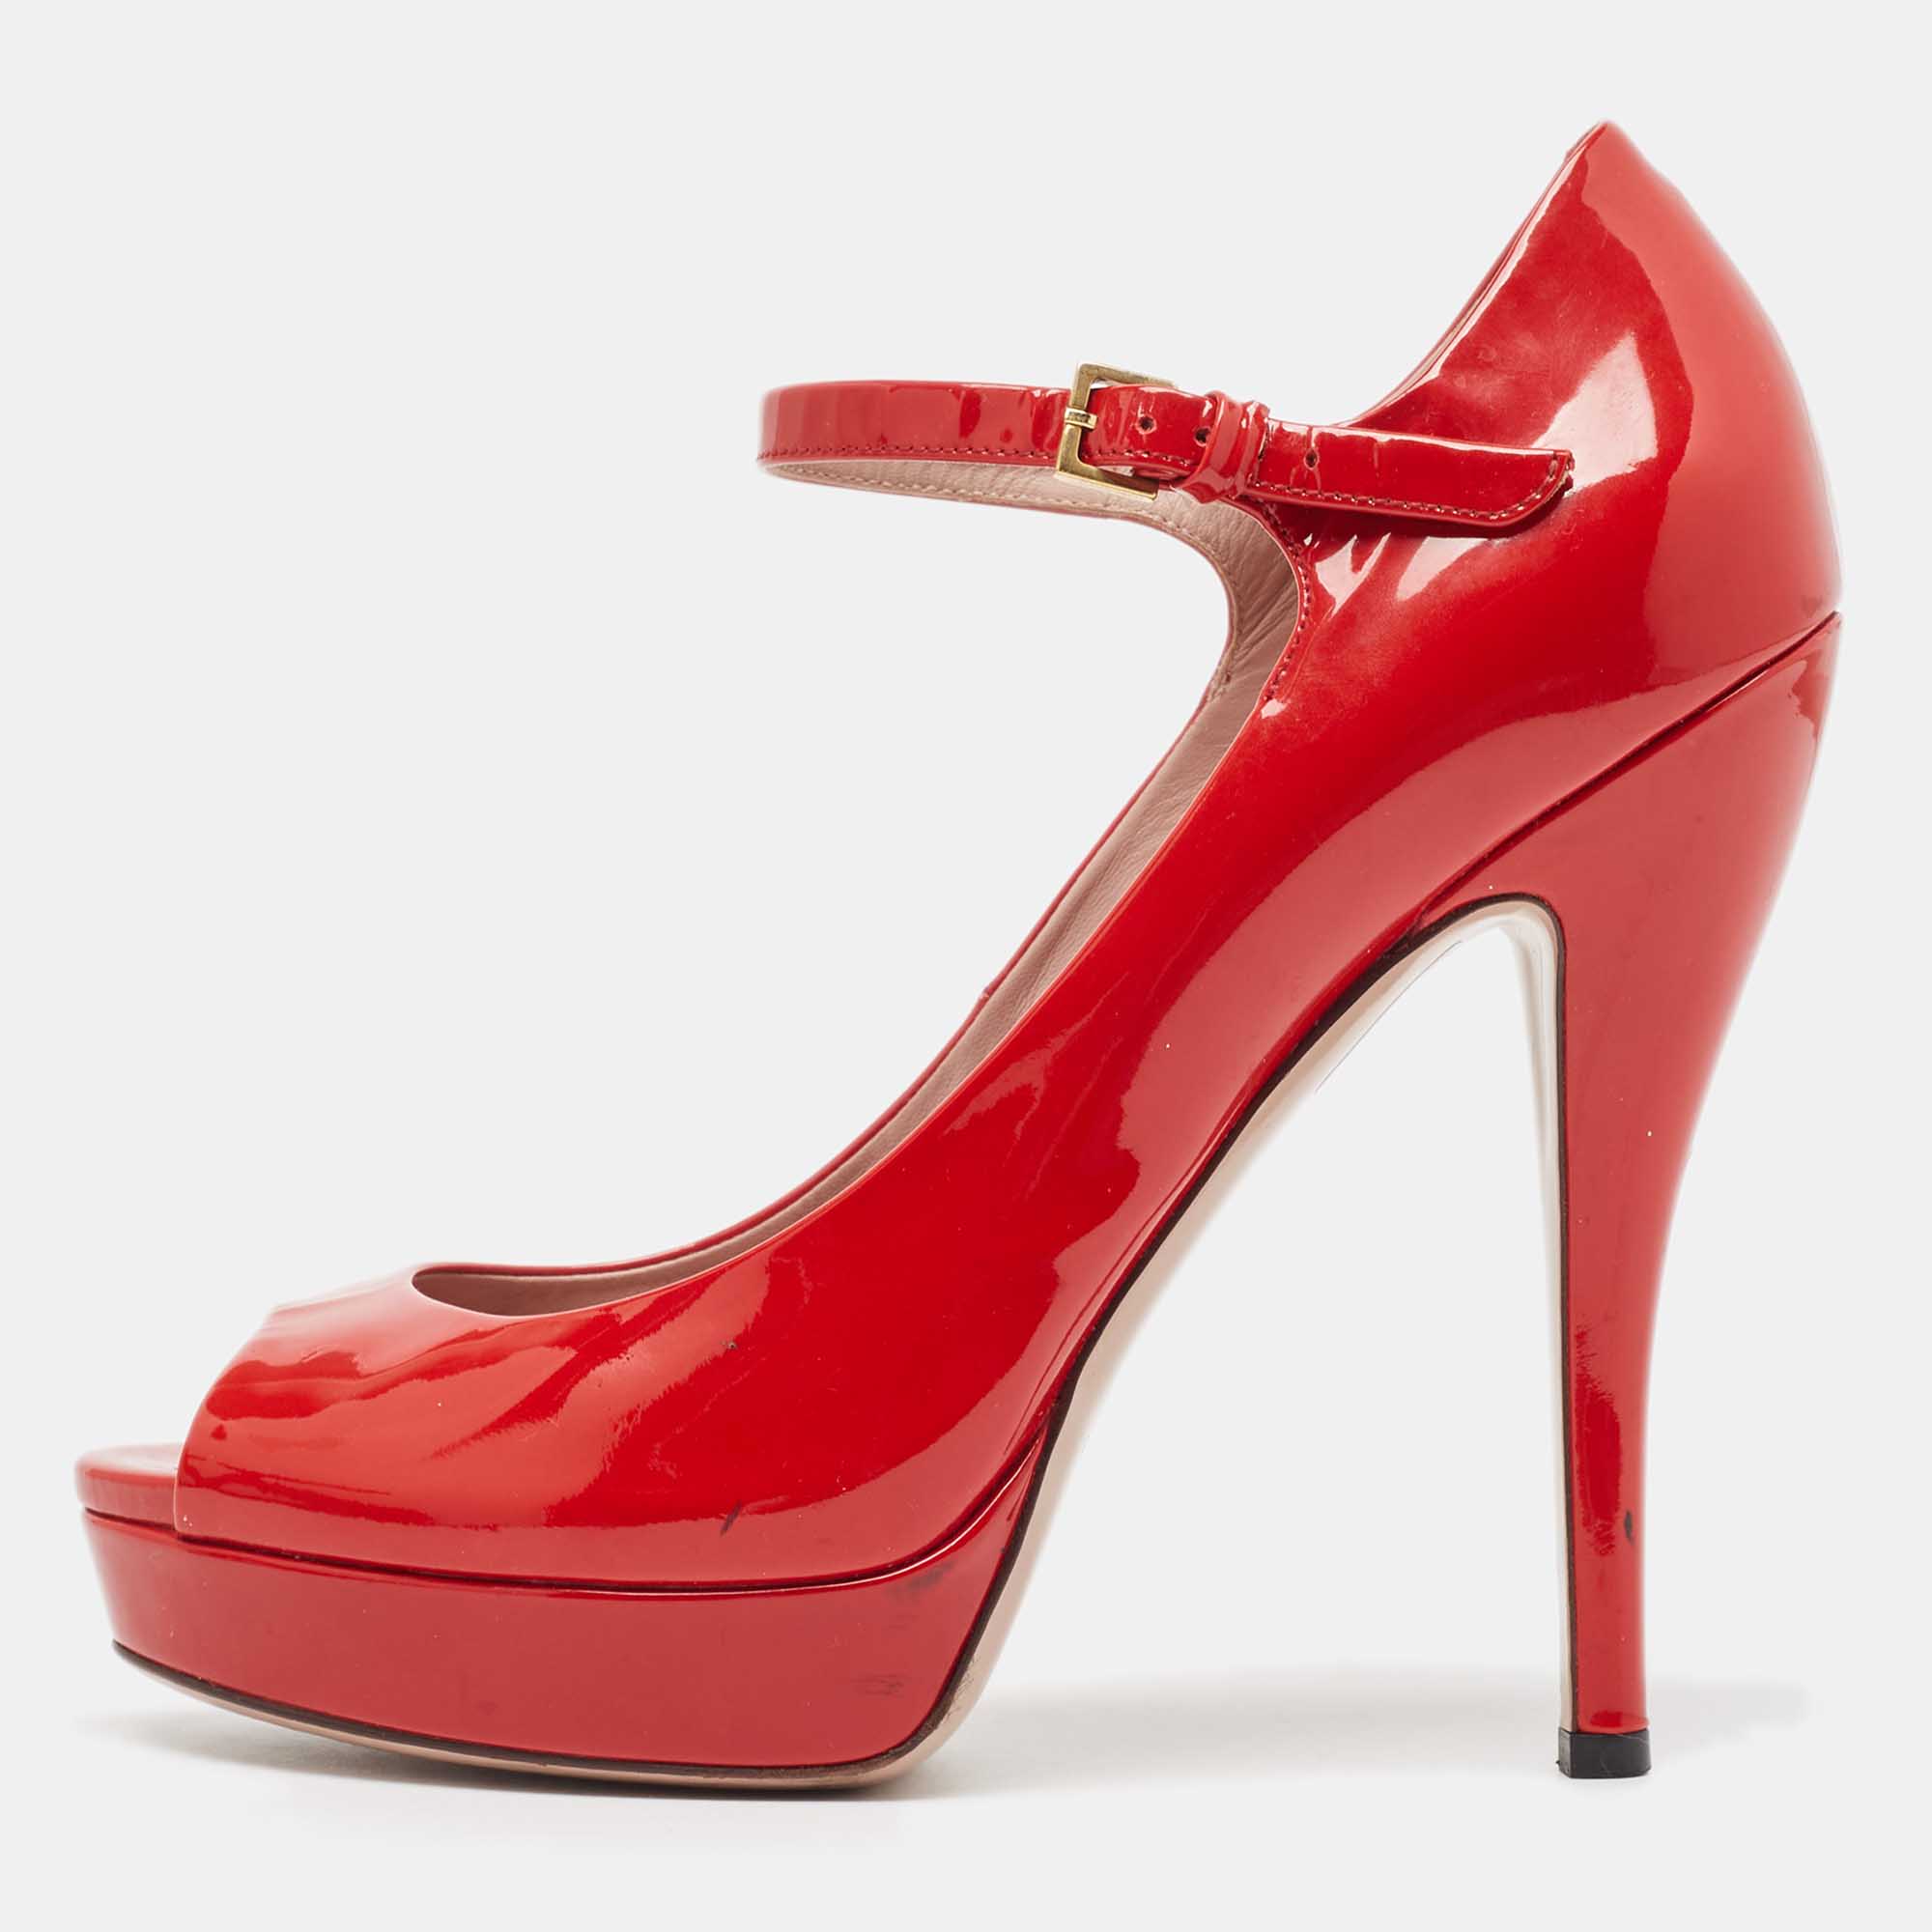 Gucci red patent leather peep toe platform ankle strap pumps size 39